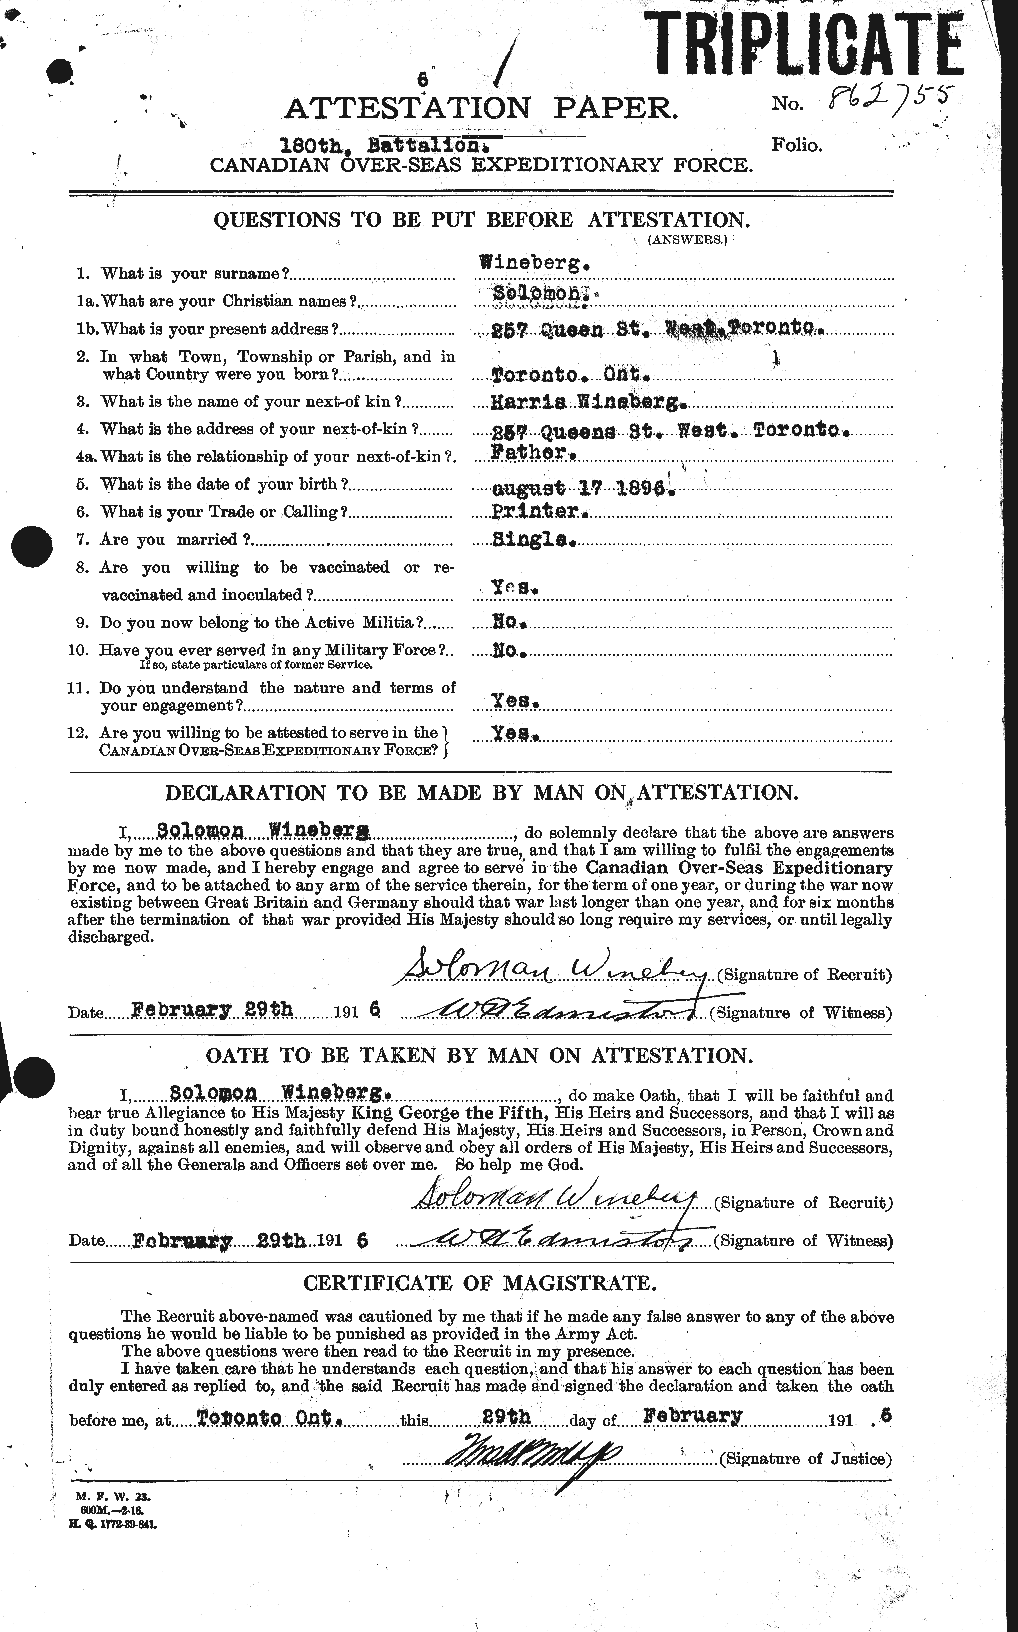 Personnel Records of the First World War - CEF 678899a